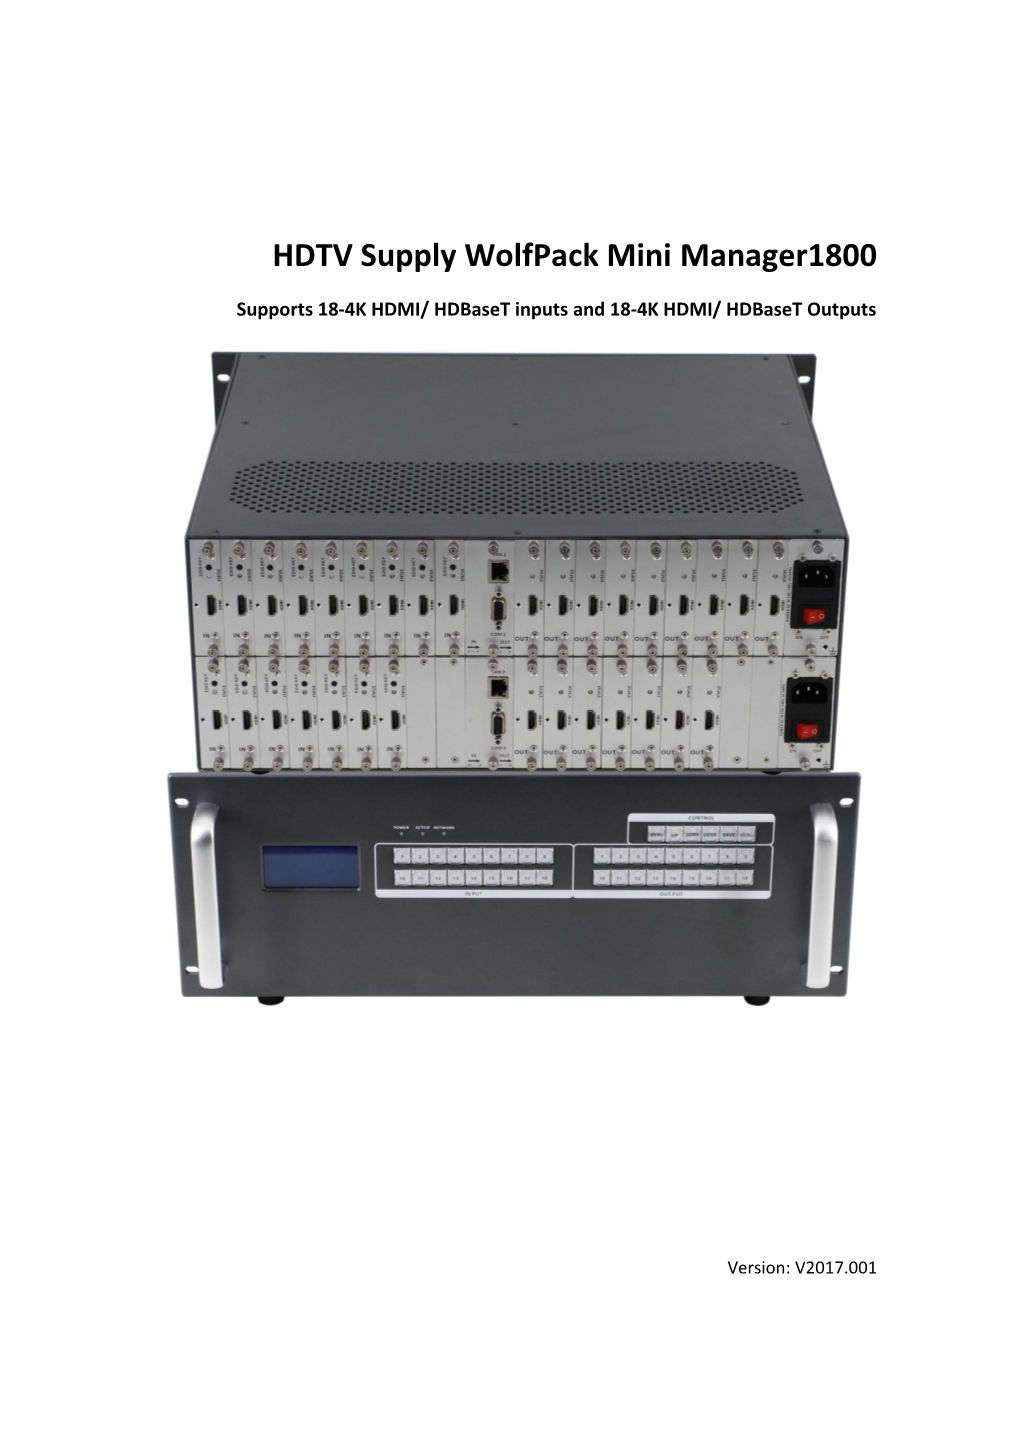 HDTV Supply Wolfpack Mini Manager1800